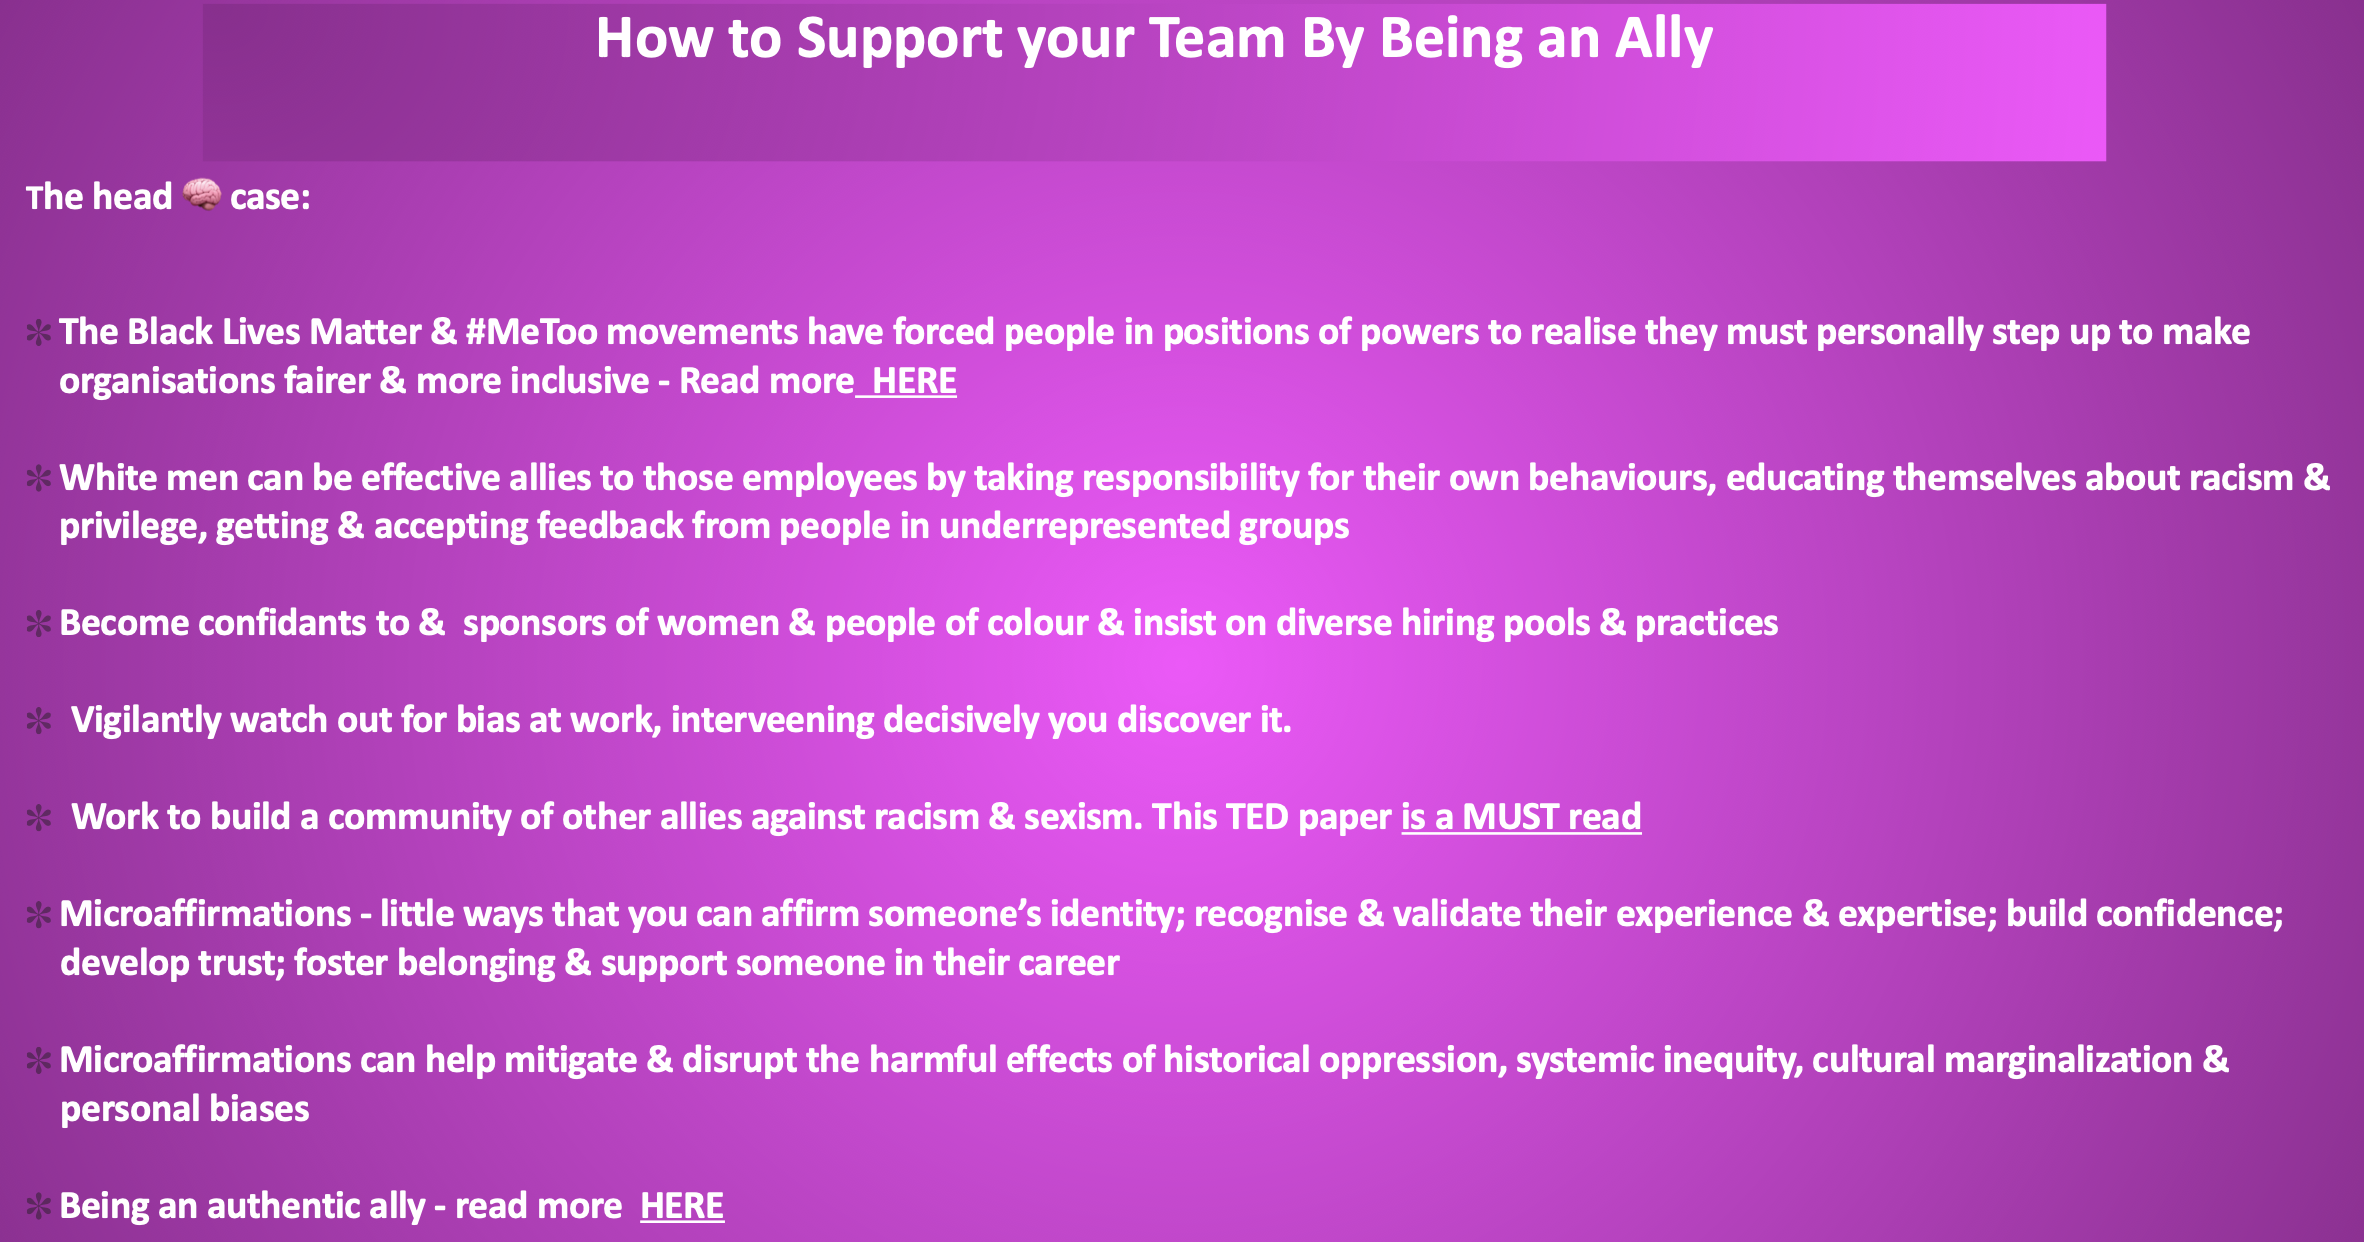 Supporting your Team Being an Ally - Being Better Not Bitter featured image